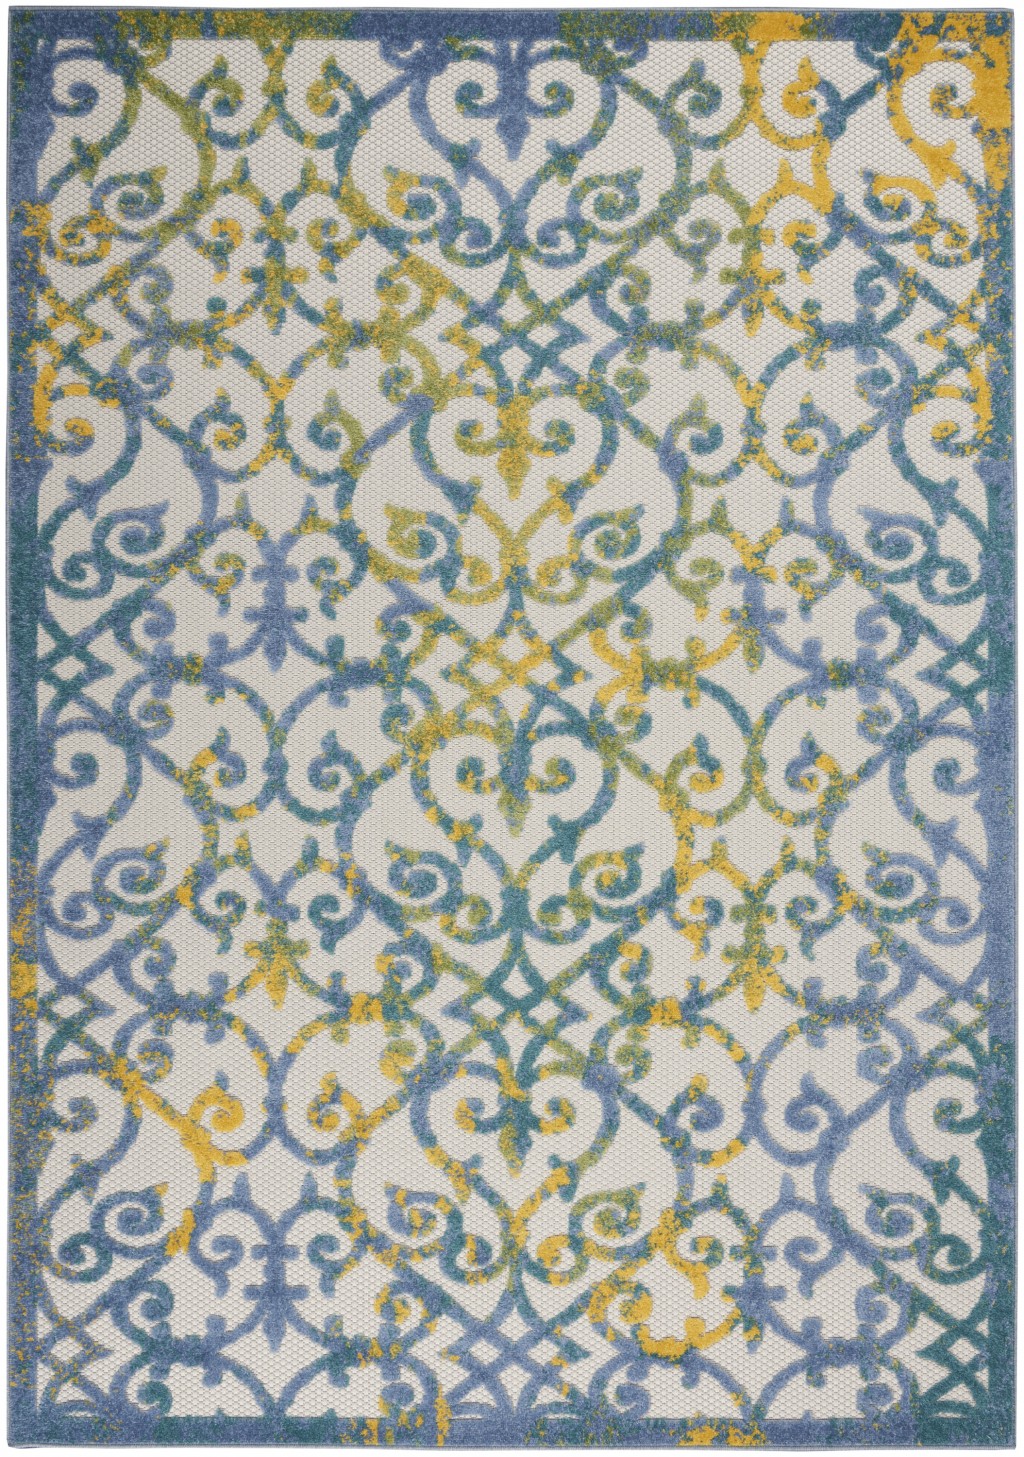 6' X 9' Ivory And Blue Floral Indoor Outdoor Area Rug-385021-1